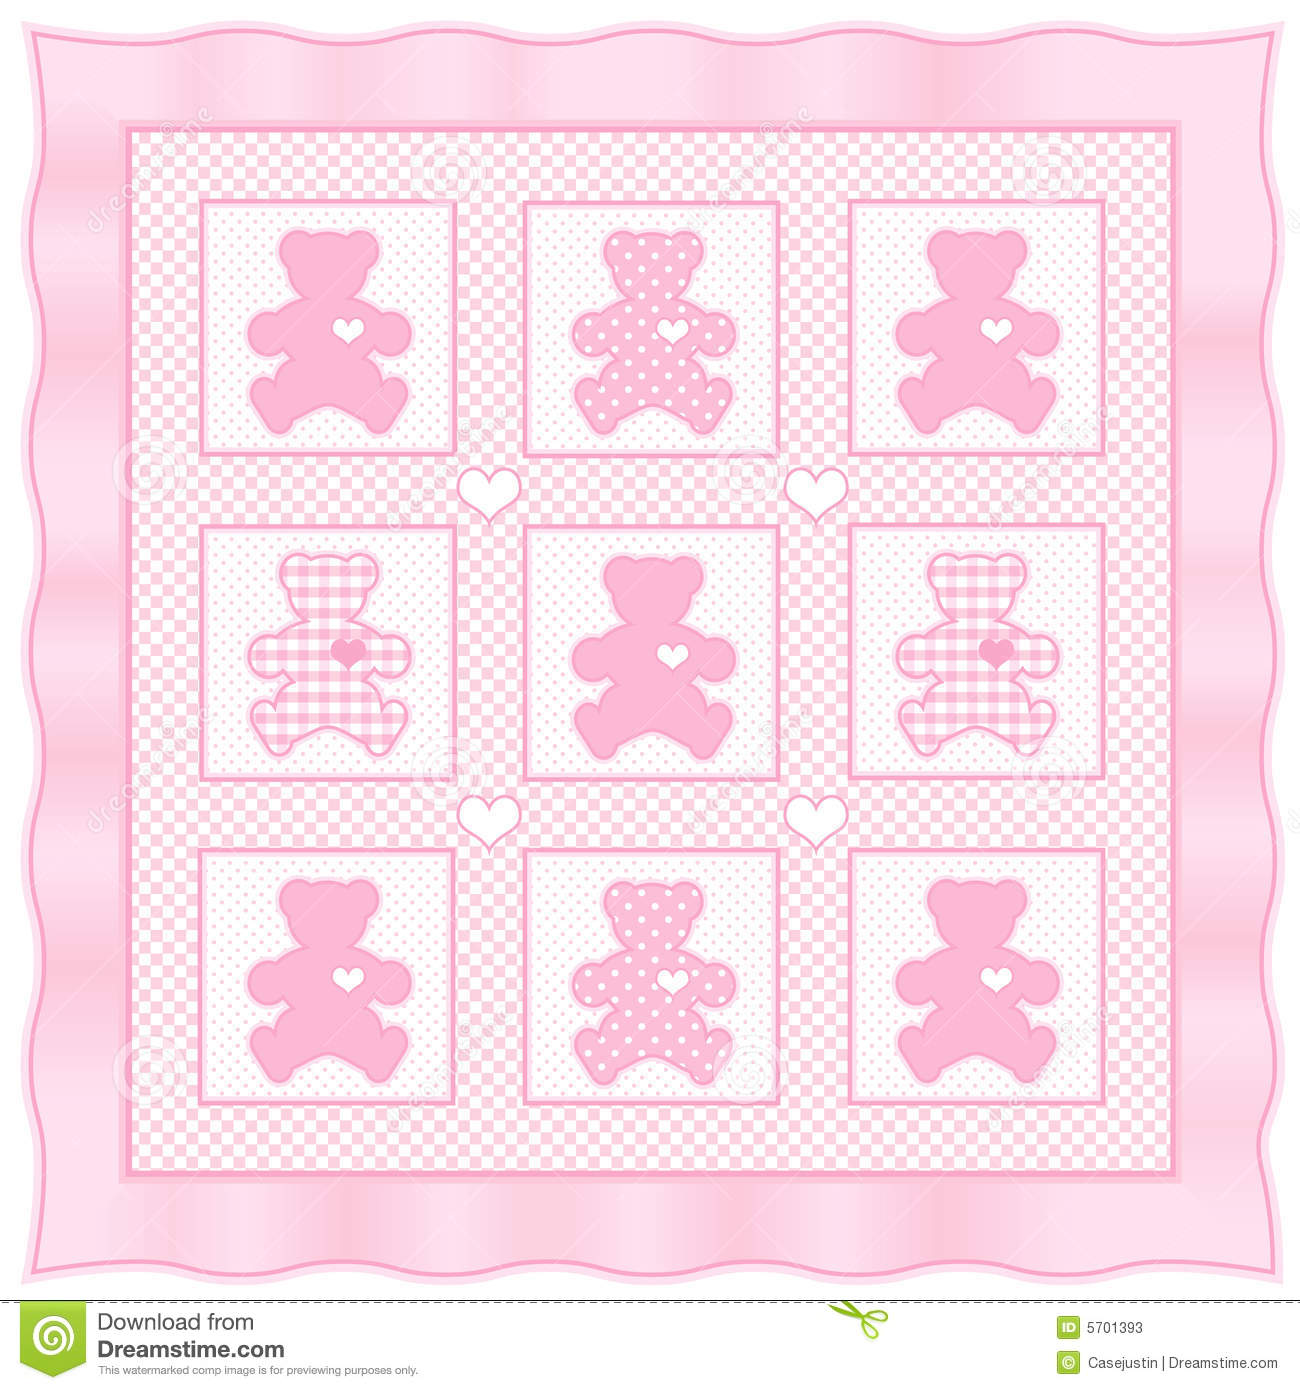 Classic Quilt Pattern For Babies Or Dolls  Cute Teddy Bears With Big